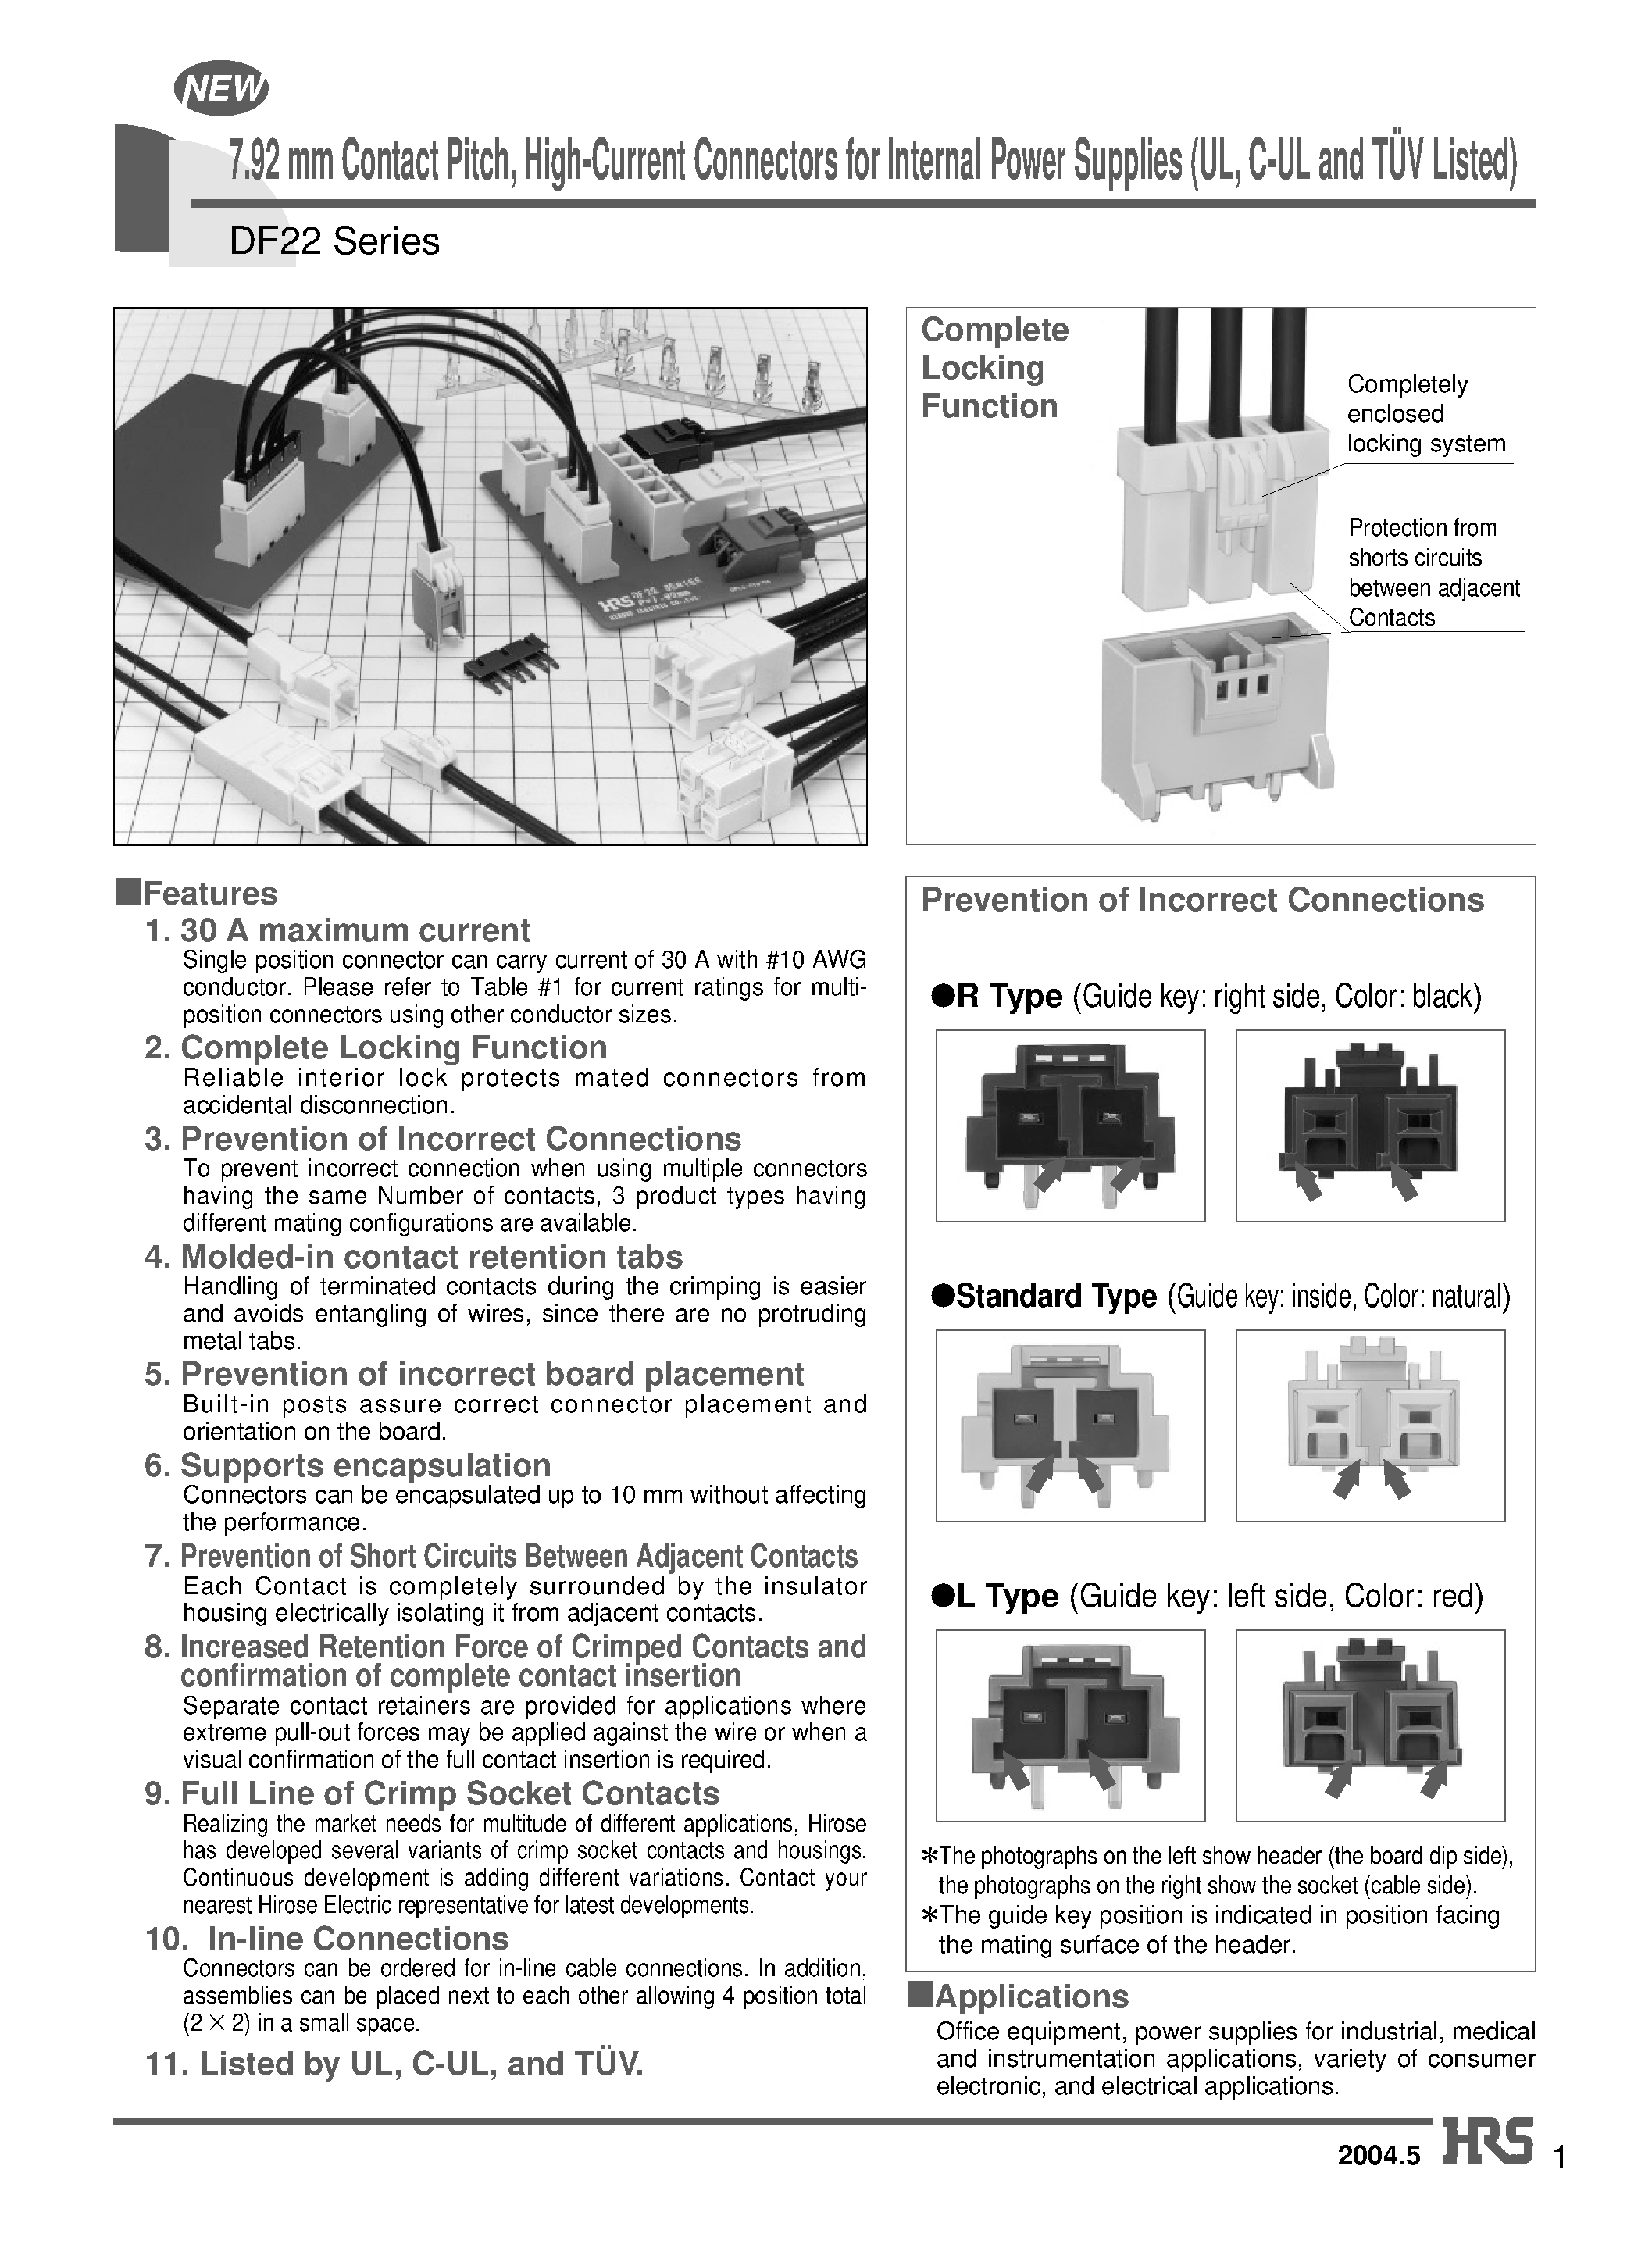 Datasheet DF22-1S-7.92C - 7.92 mm Contact Pitch/ High-Current Connectors for Internal Power Supplies (UL/ C-UL and TUV Listed) page 1